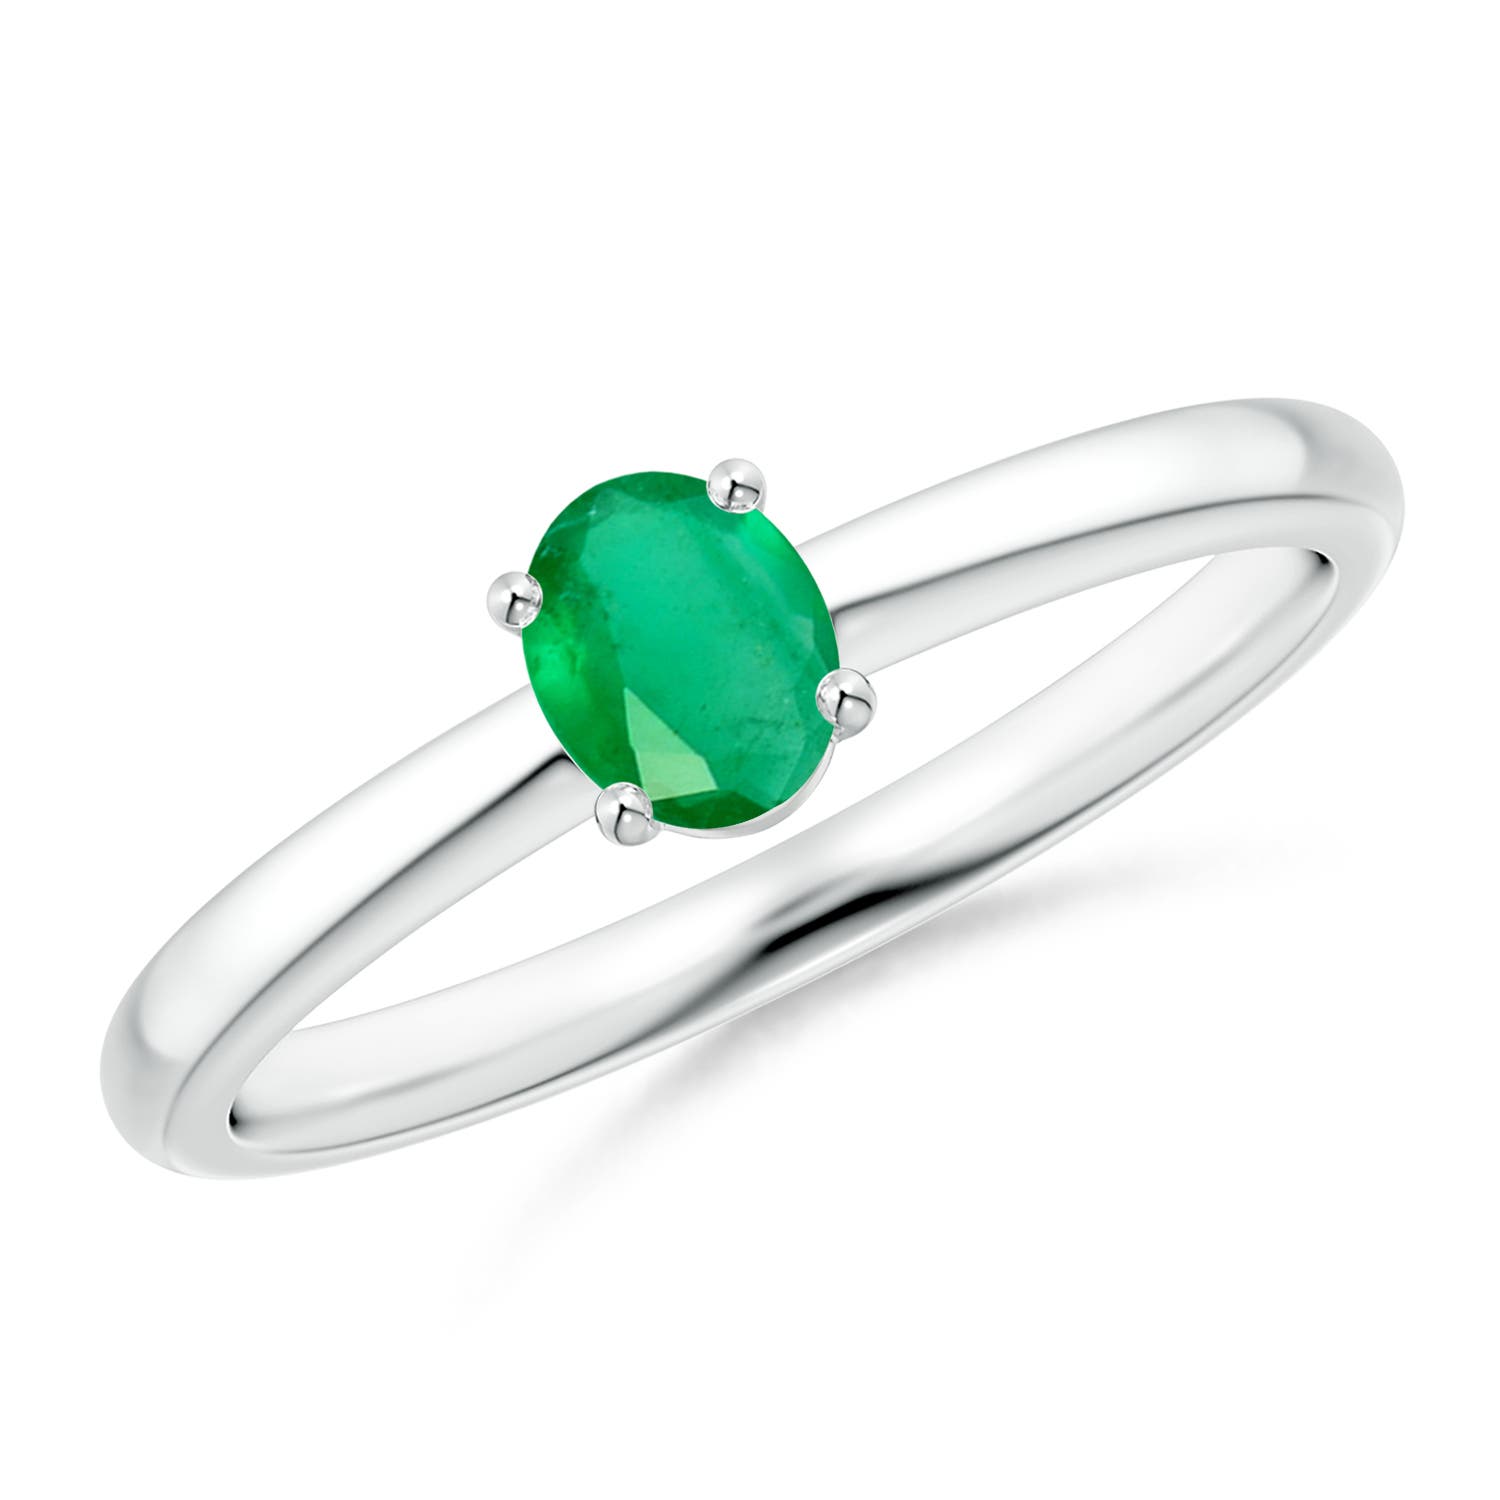 A - Emerald / 0.3 CT / 14 KT White Gold